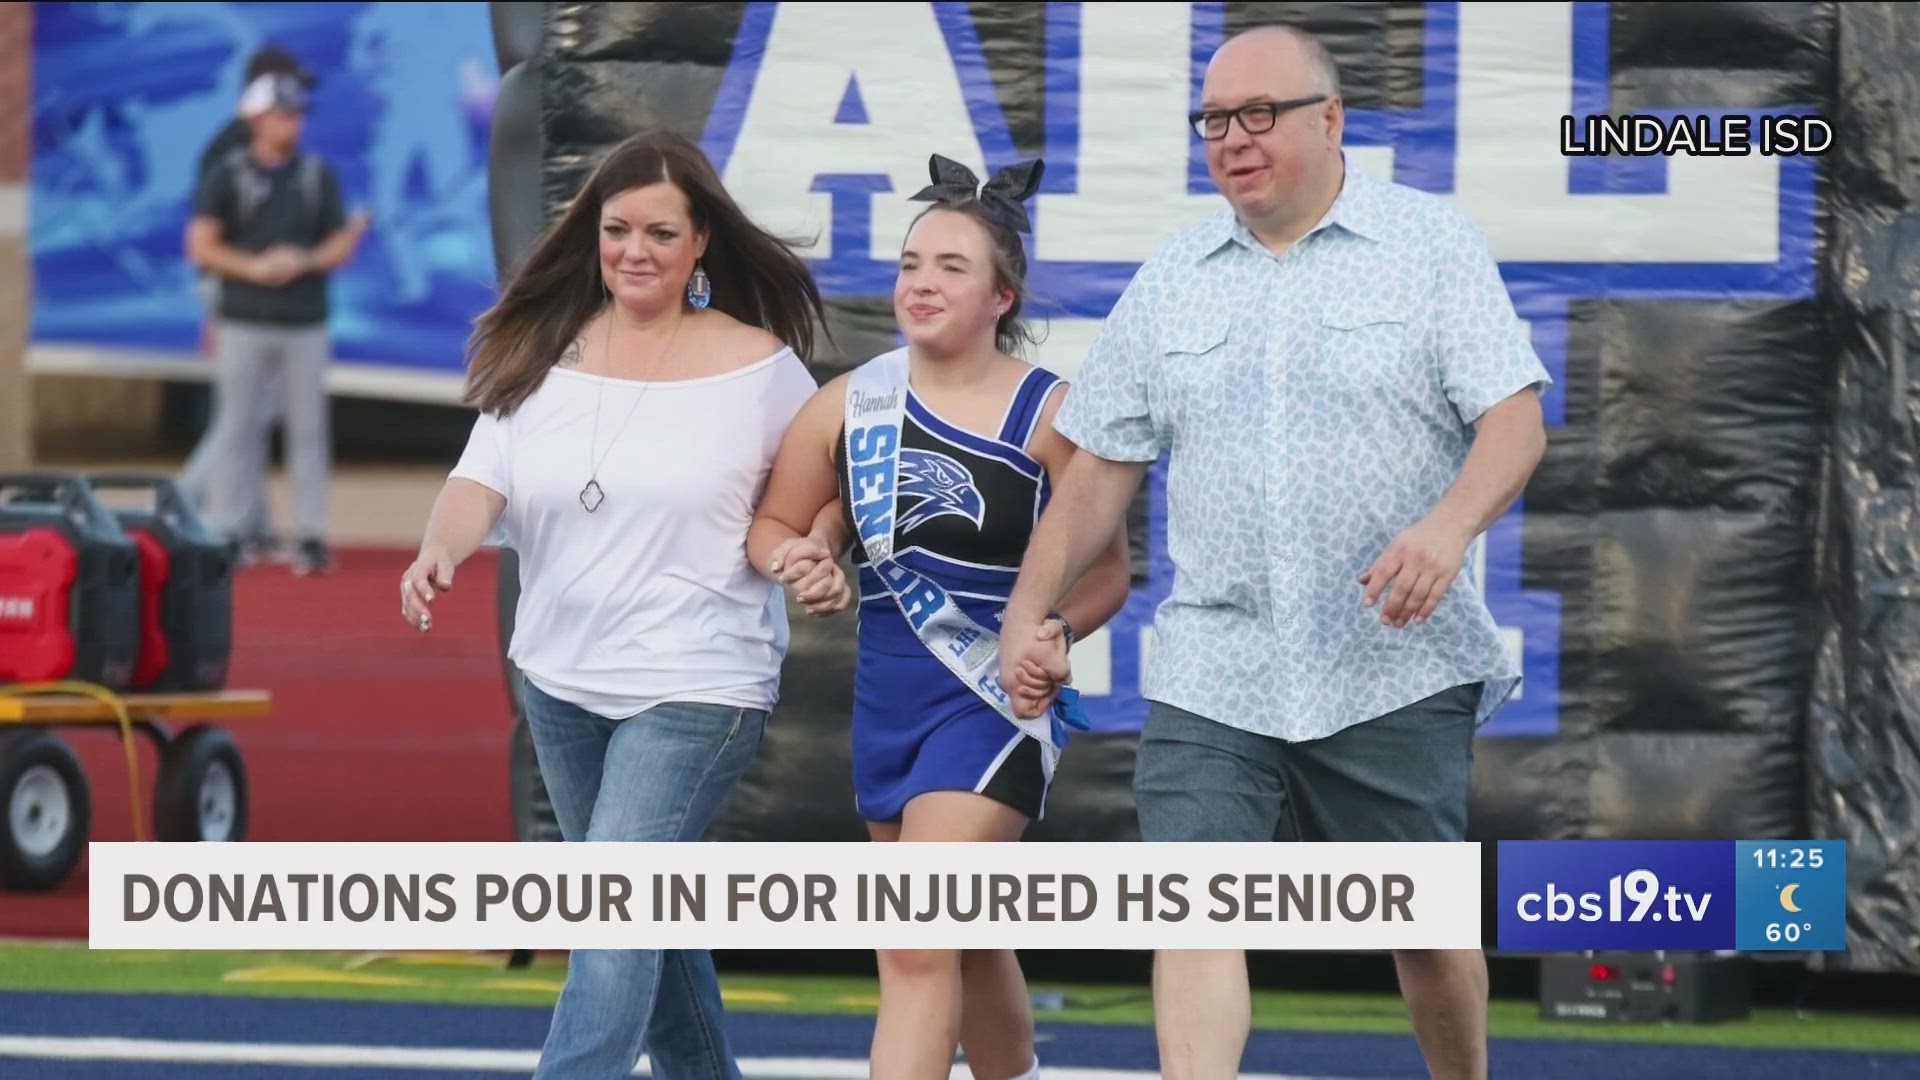 East Texas community continues to support Lindale senior recovering from skiing accident.